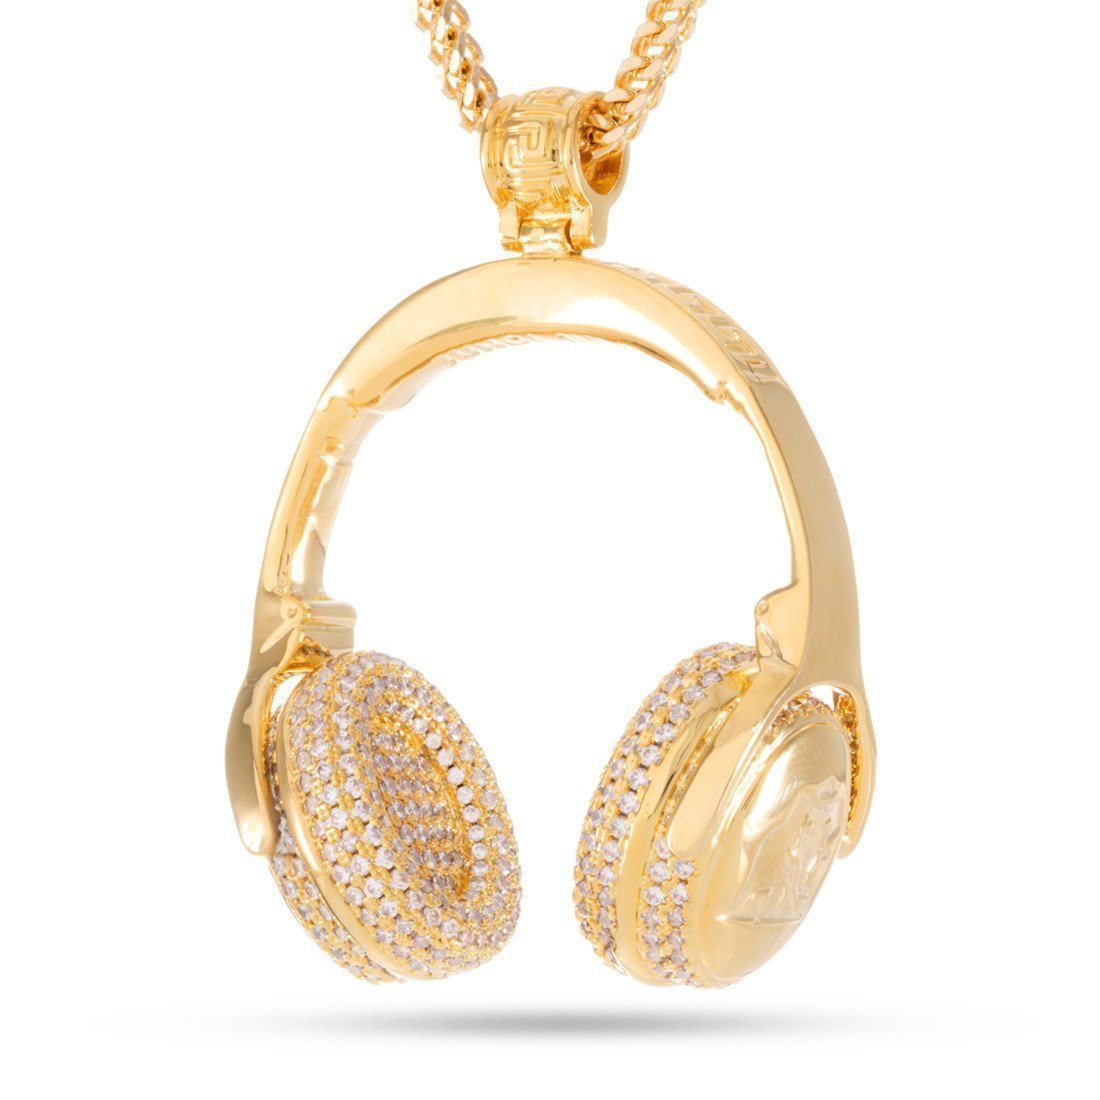 Image of Headphones Necklace - Designed by Snoop Dogg